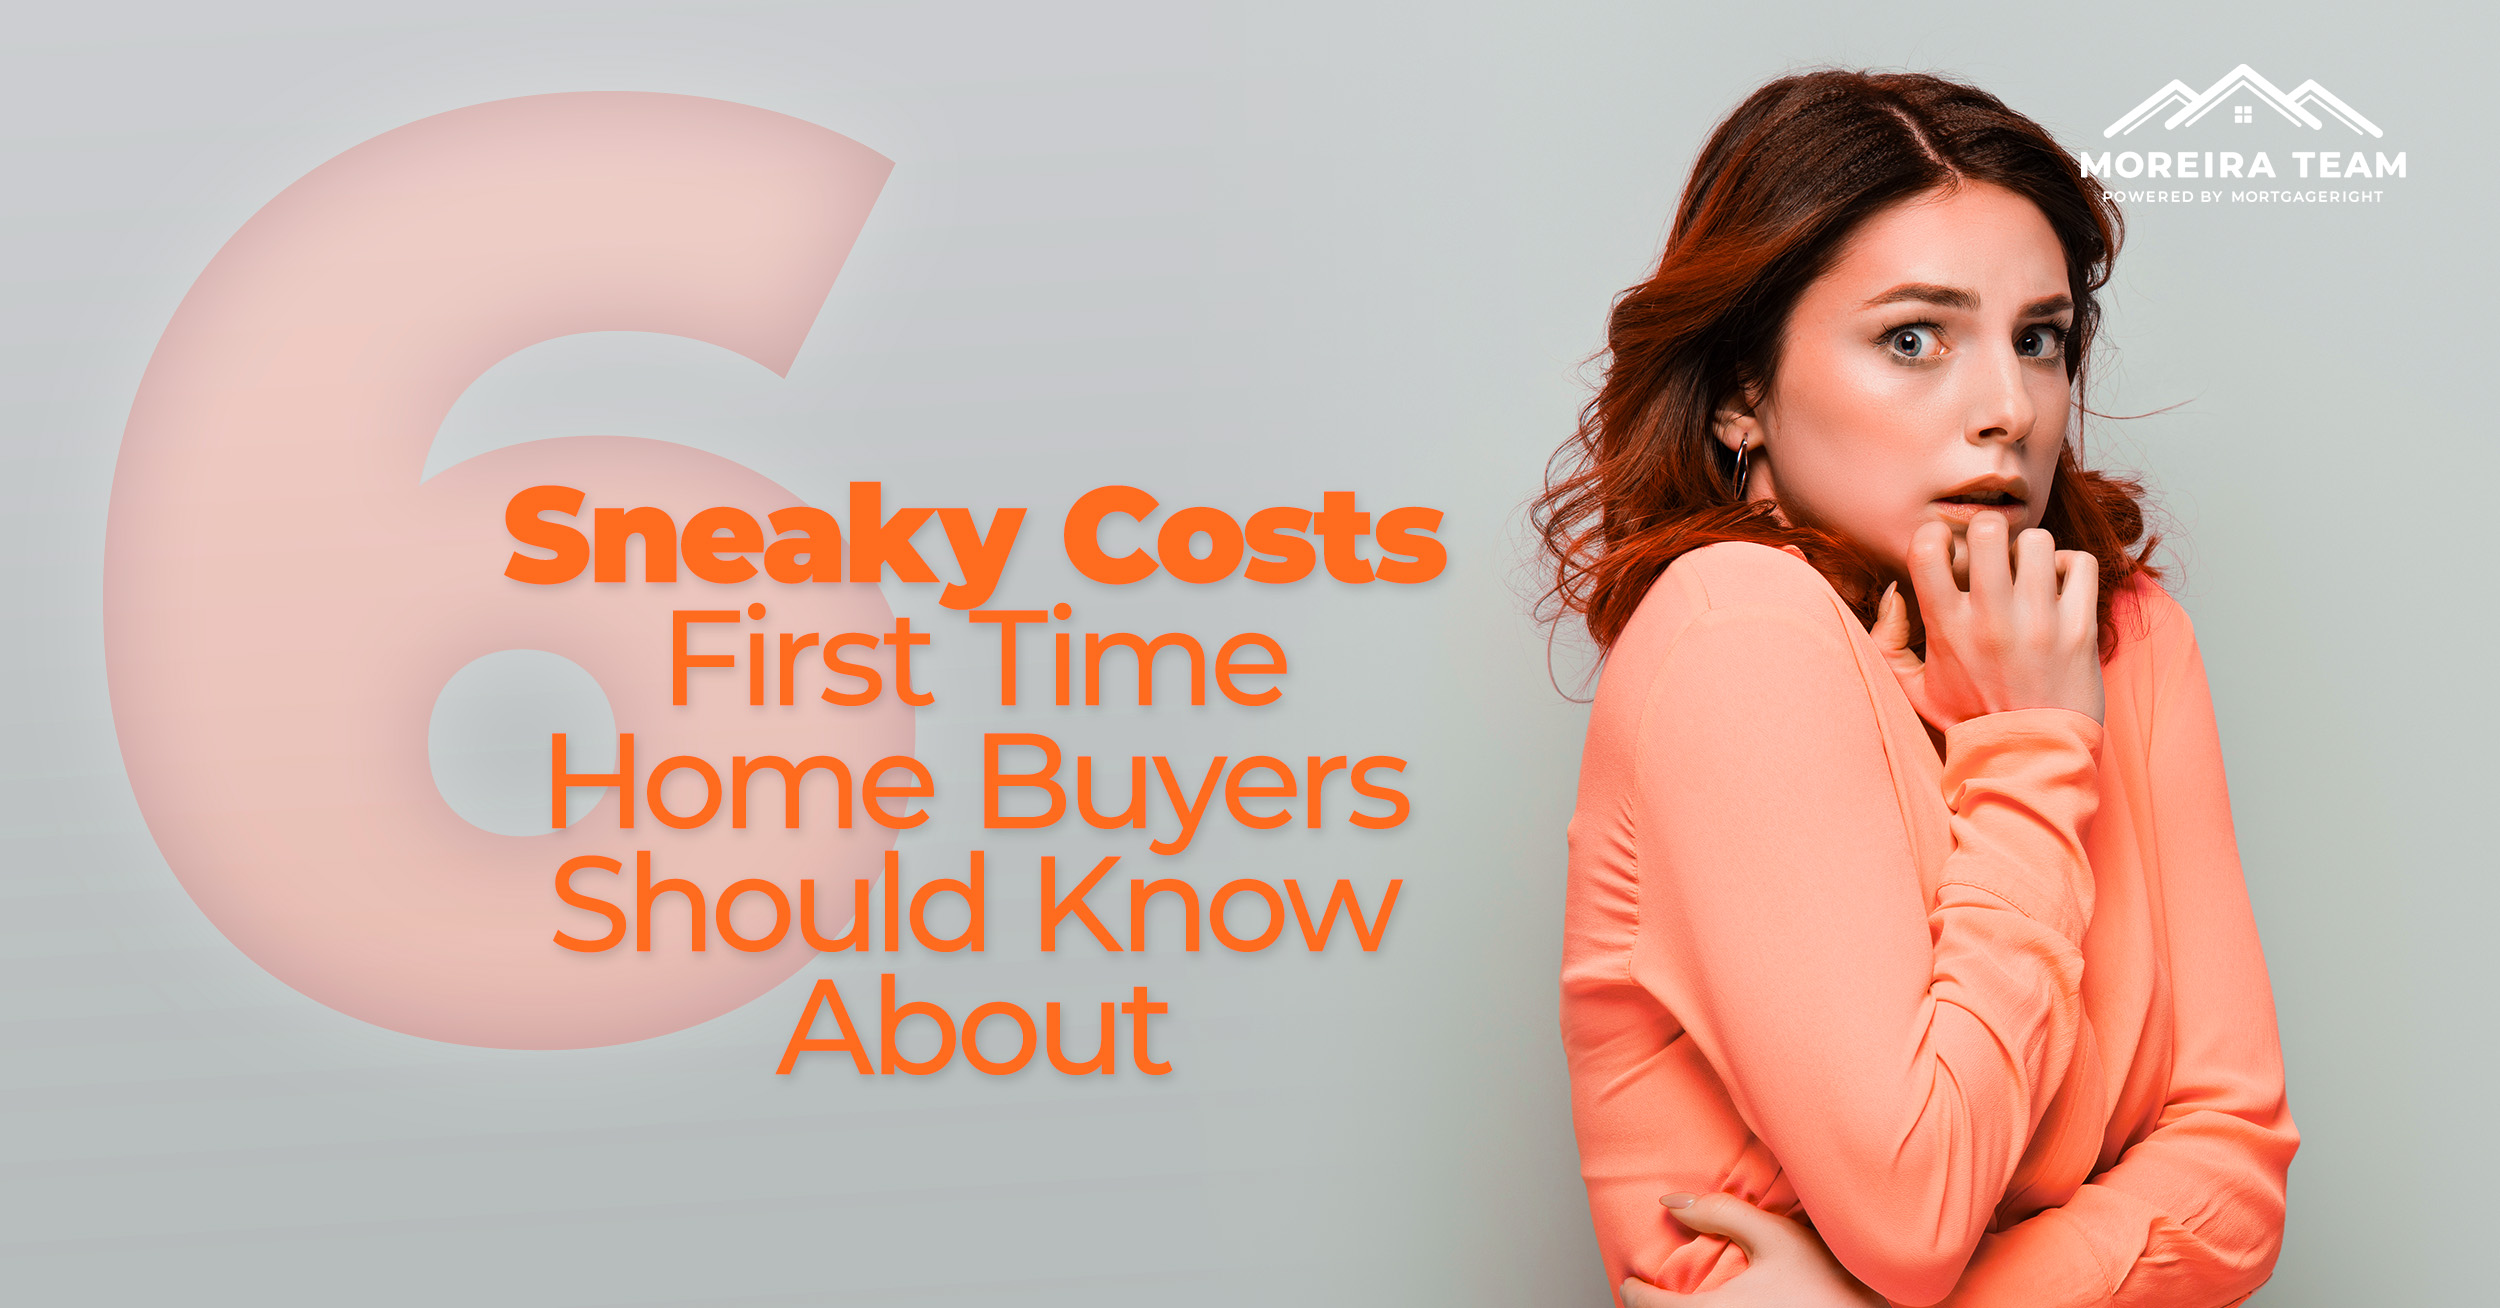 6 sneaky cost to avoid as a first time homebuyer